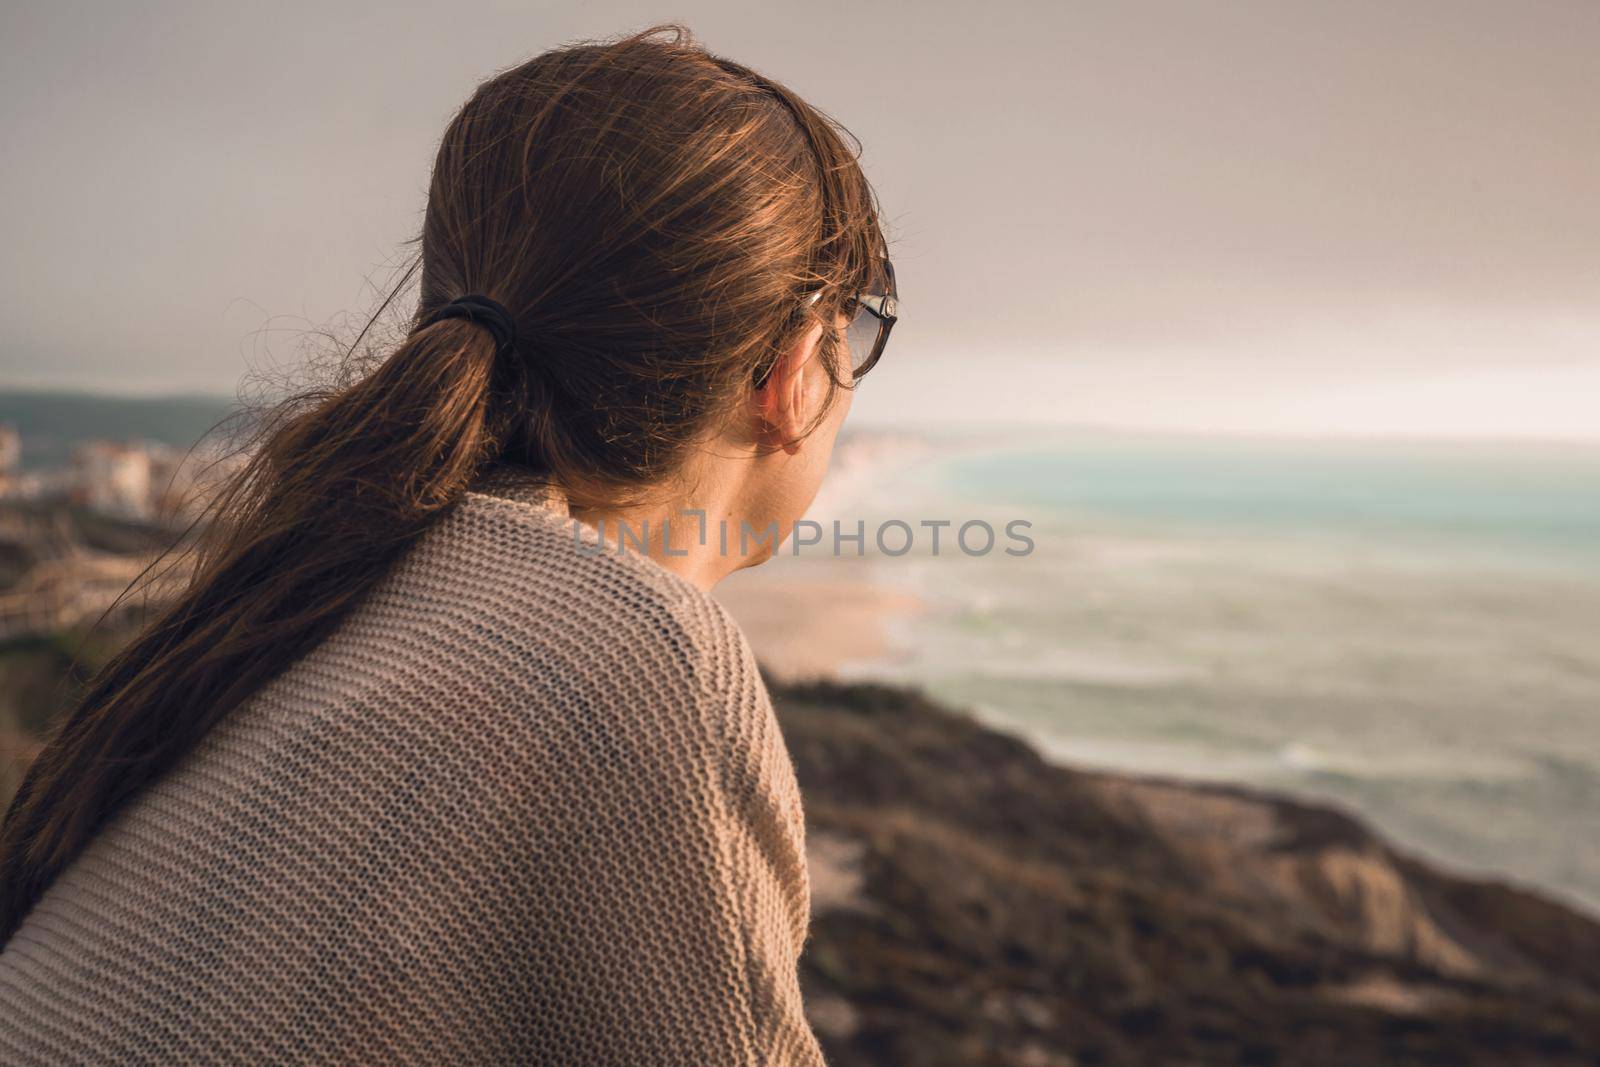 Woman alone lost in her thoughts